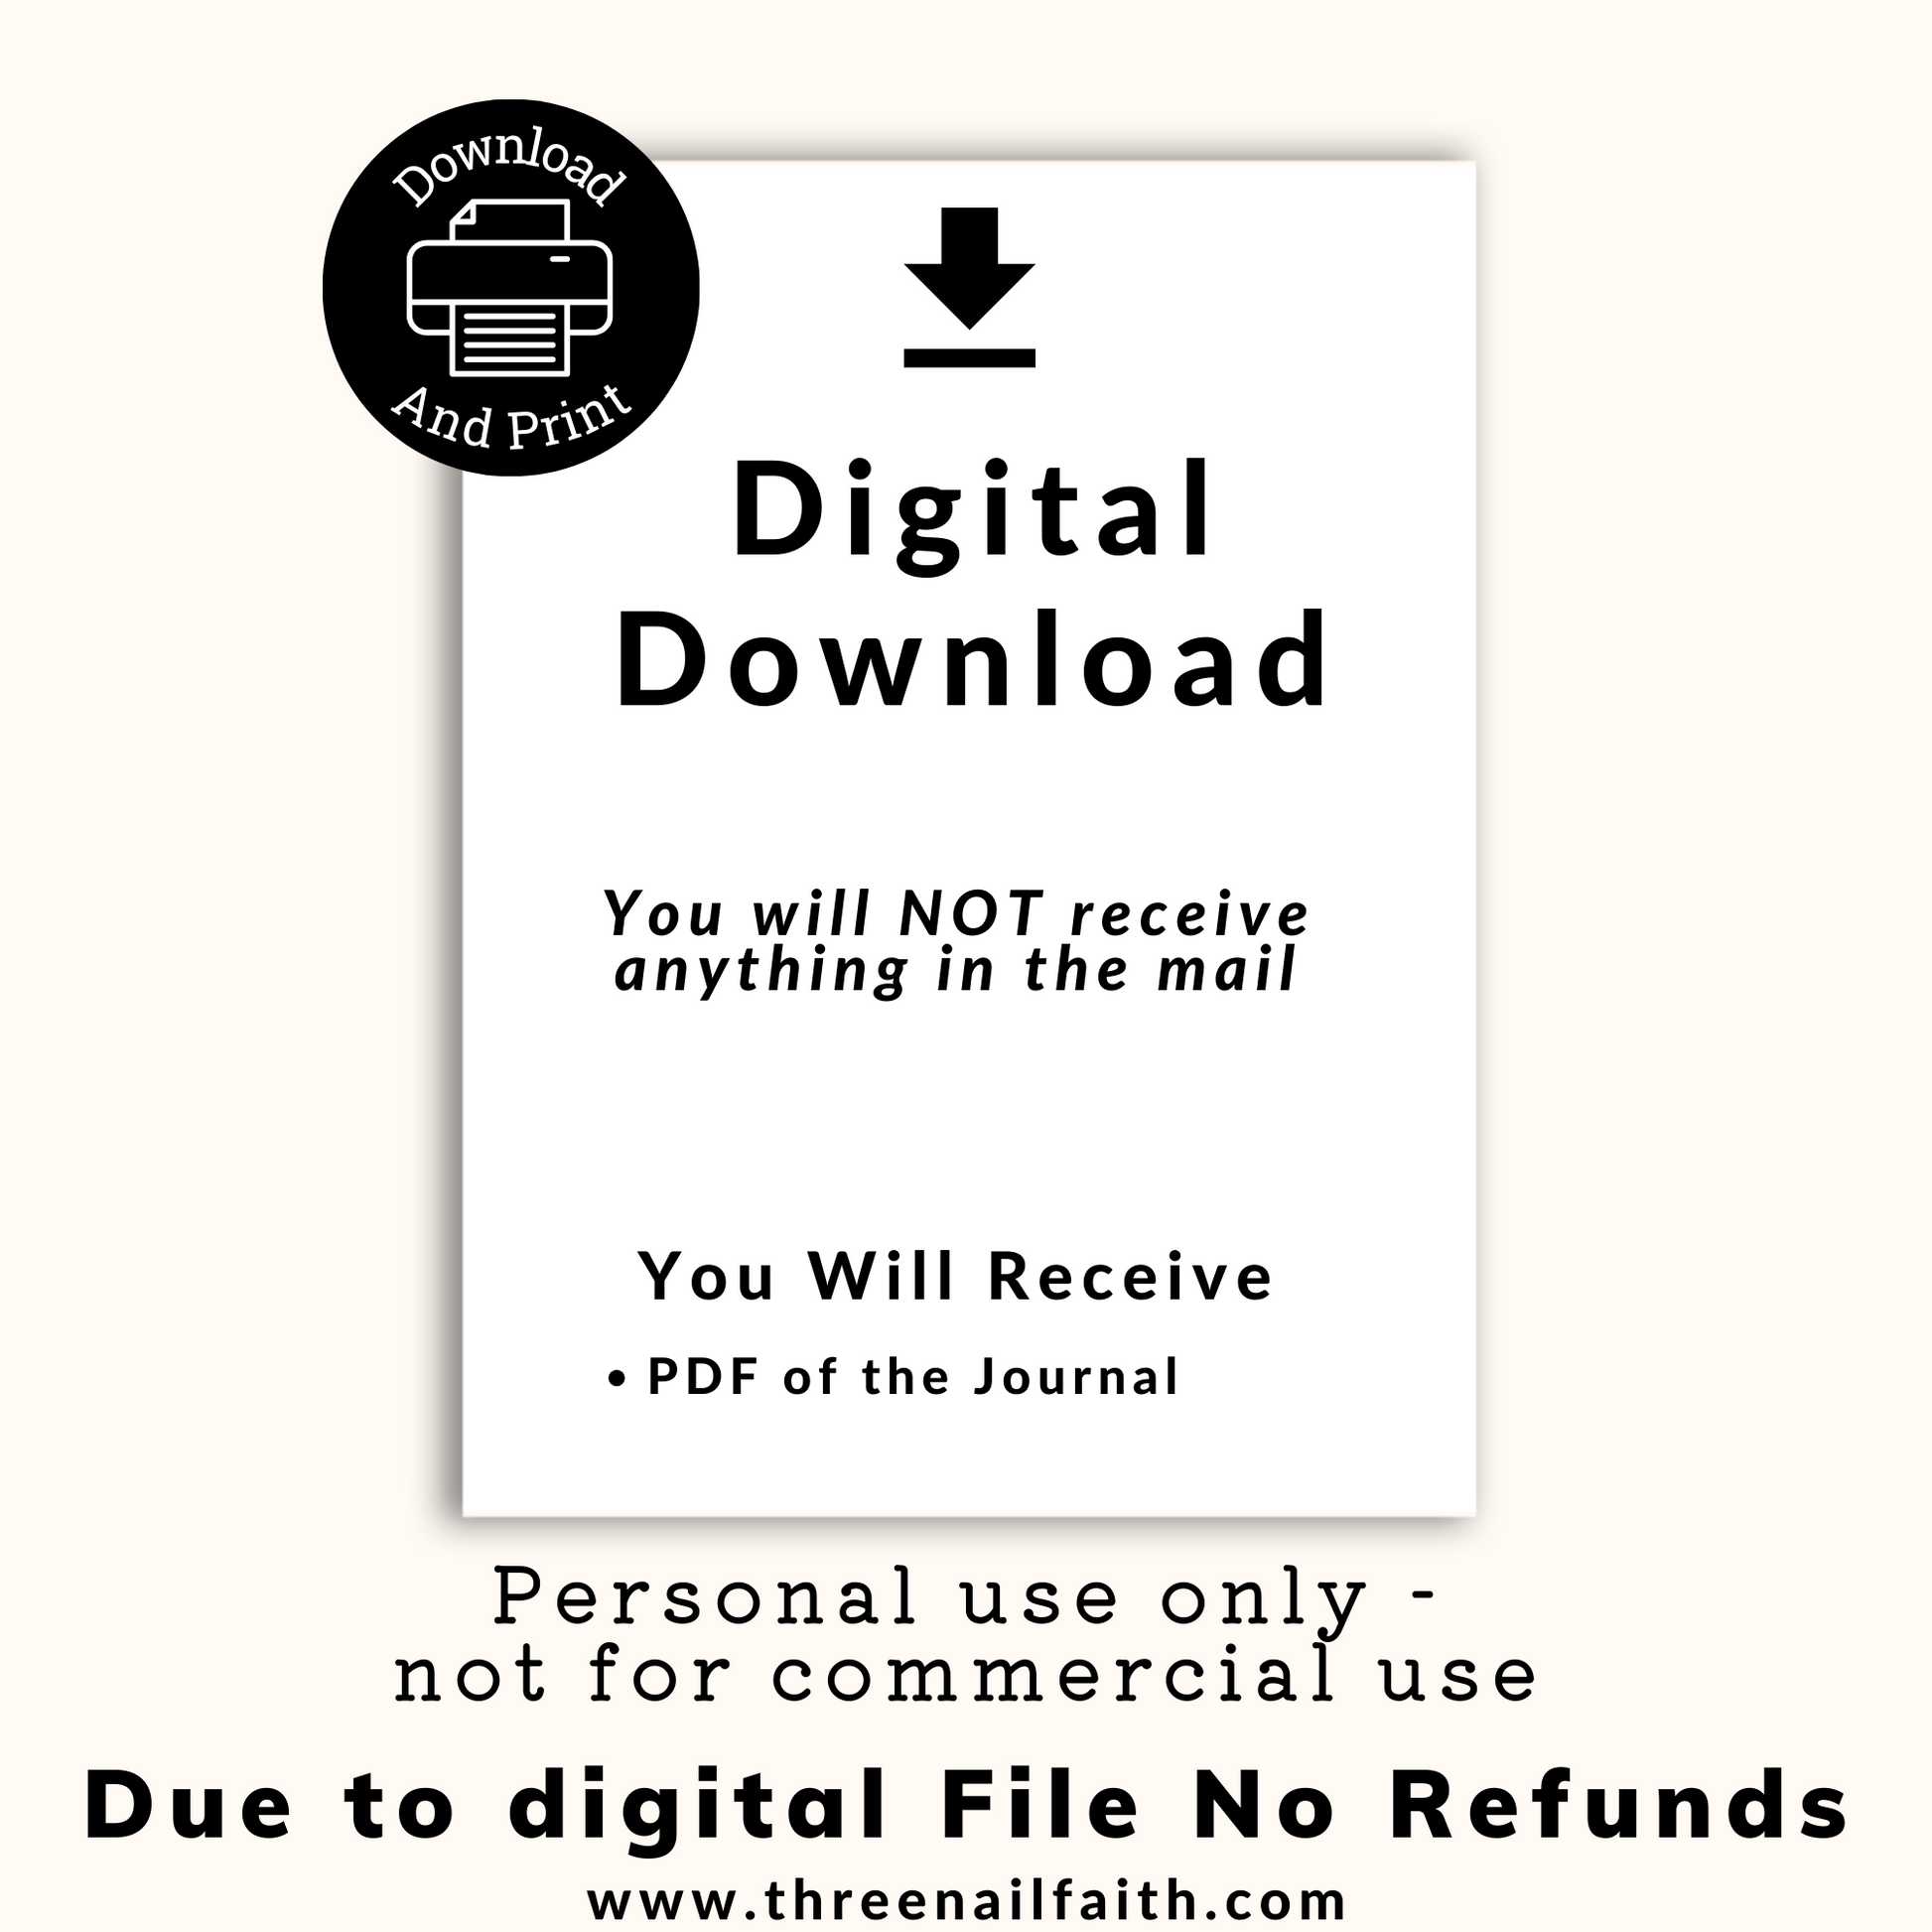 this is a digital download, you will not receive anything in the mail, you will receive a PDF file with the journal, personal use only not for commercial use, due to digital download no refunds